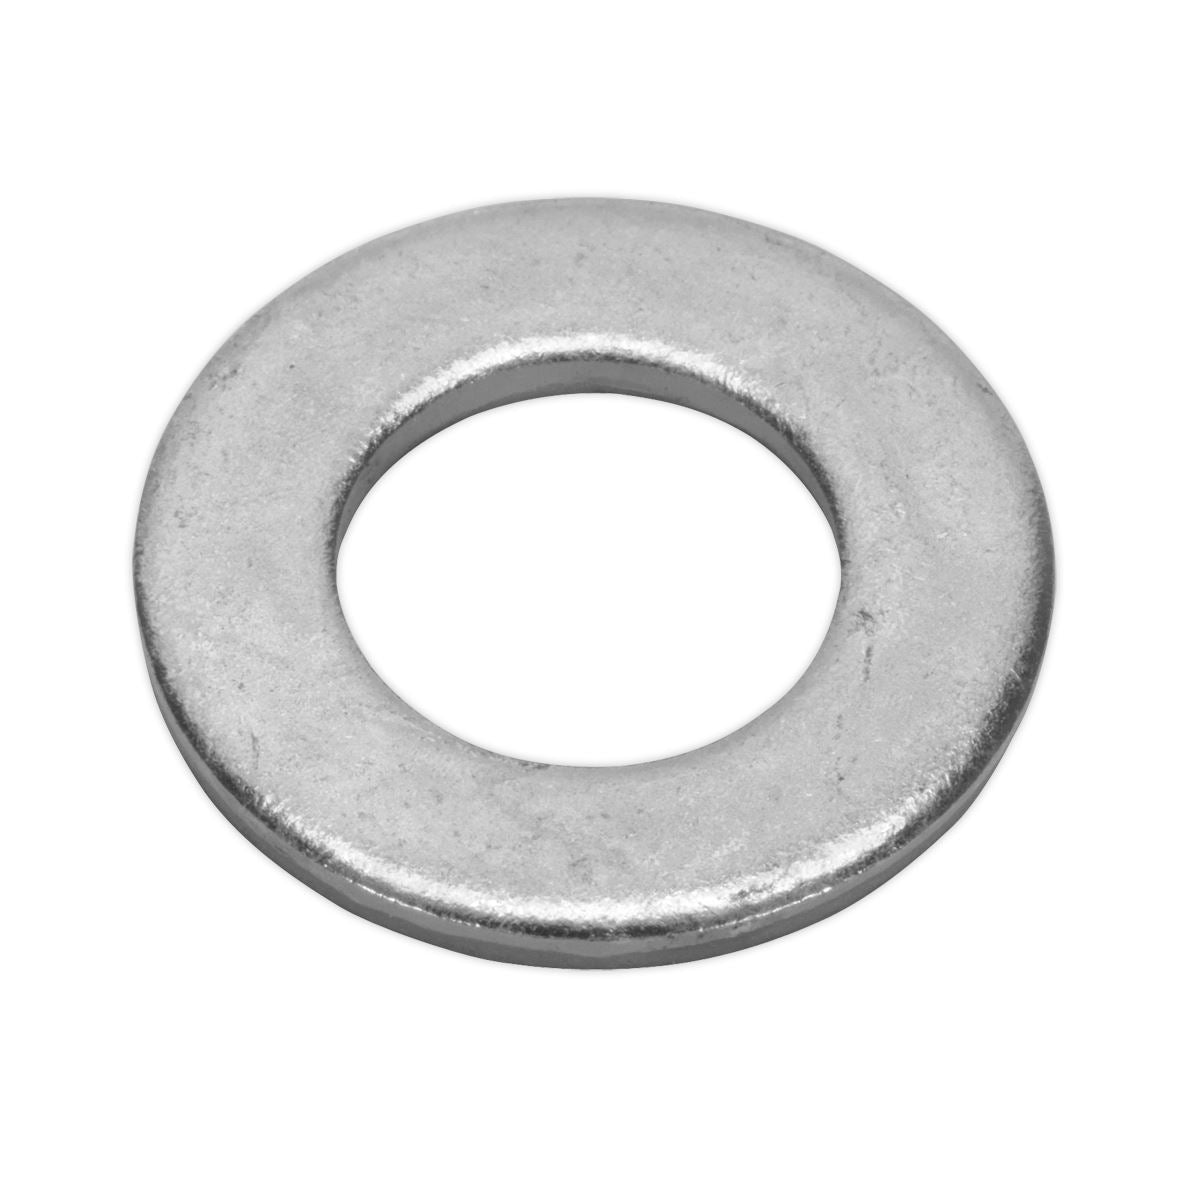 Sealey Flat Washer DIN 125 M14 x 28mm Form A Zinc Pack of 50